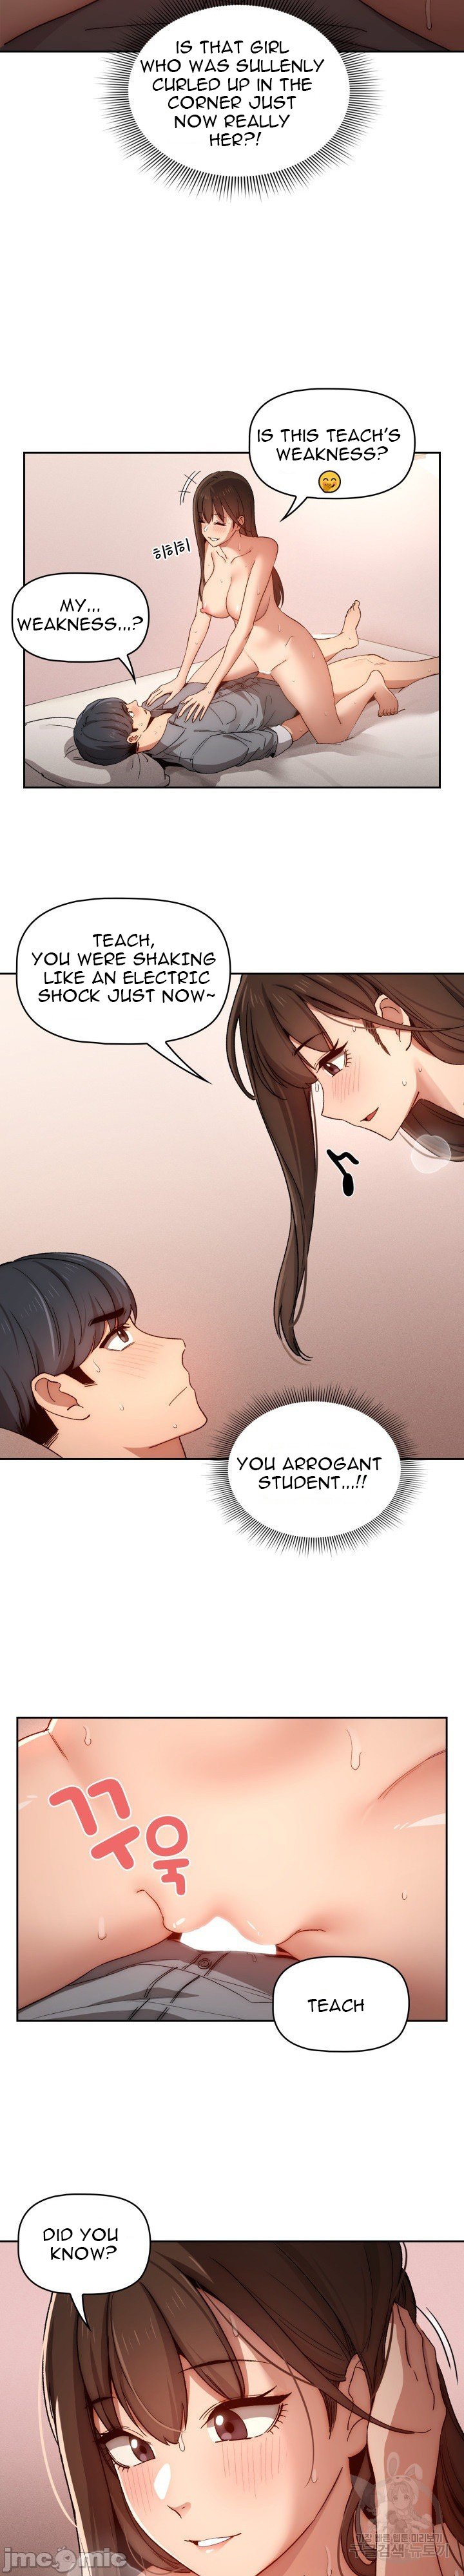 private-tutoring-in-these-trying-times-chap-31-10